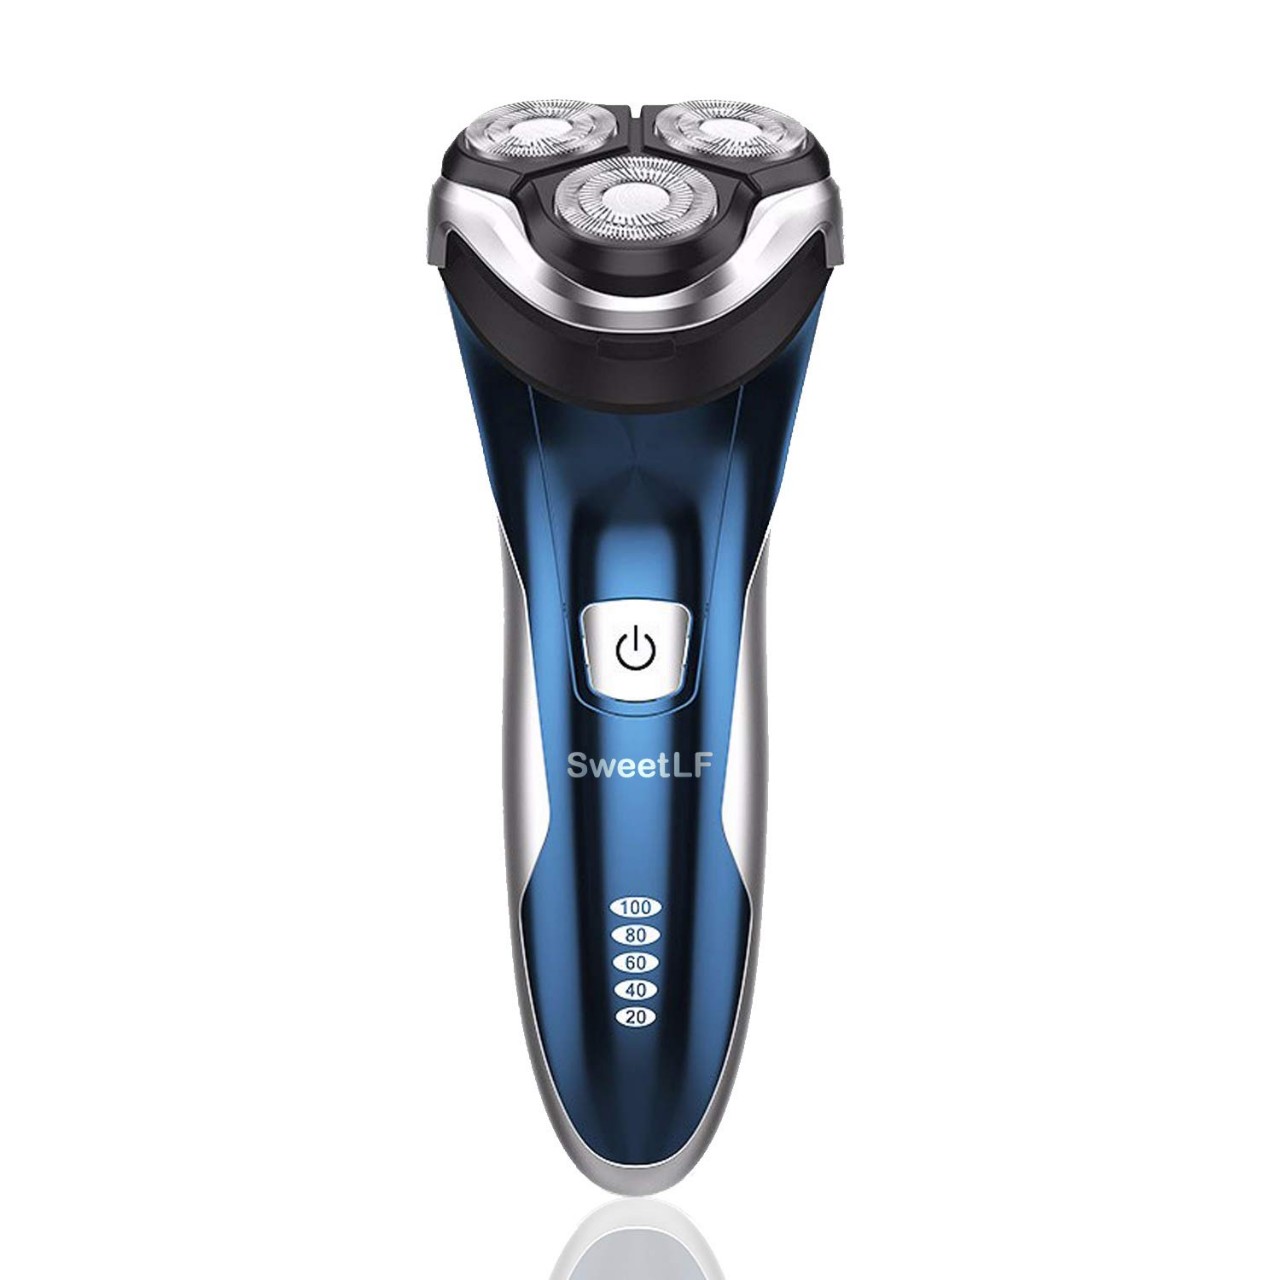 SweetLF 3D Rechargeable 100% Waterproof IPX7 Electric Shaver Wet & Dry Rotary Shavers for Men